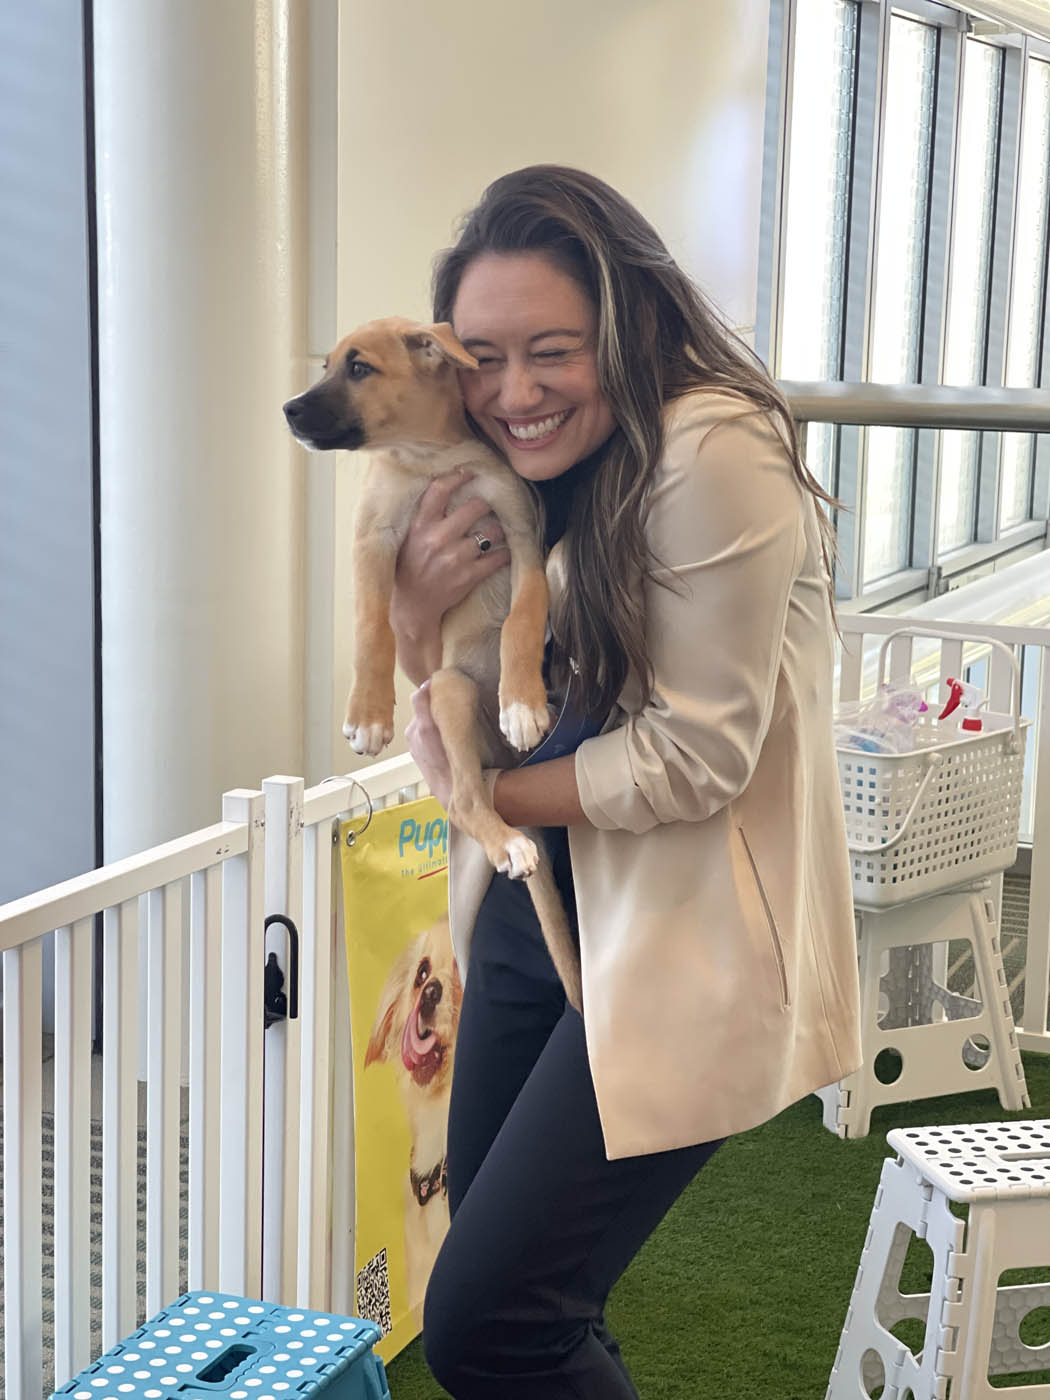 A happy man holding an adorable puppy - thanks to Puppy Love and our workplace events in your local area, {fran_state_abbrev}.